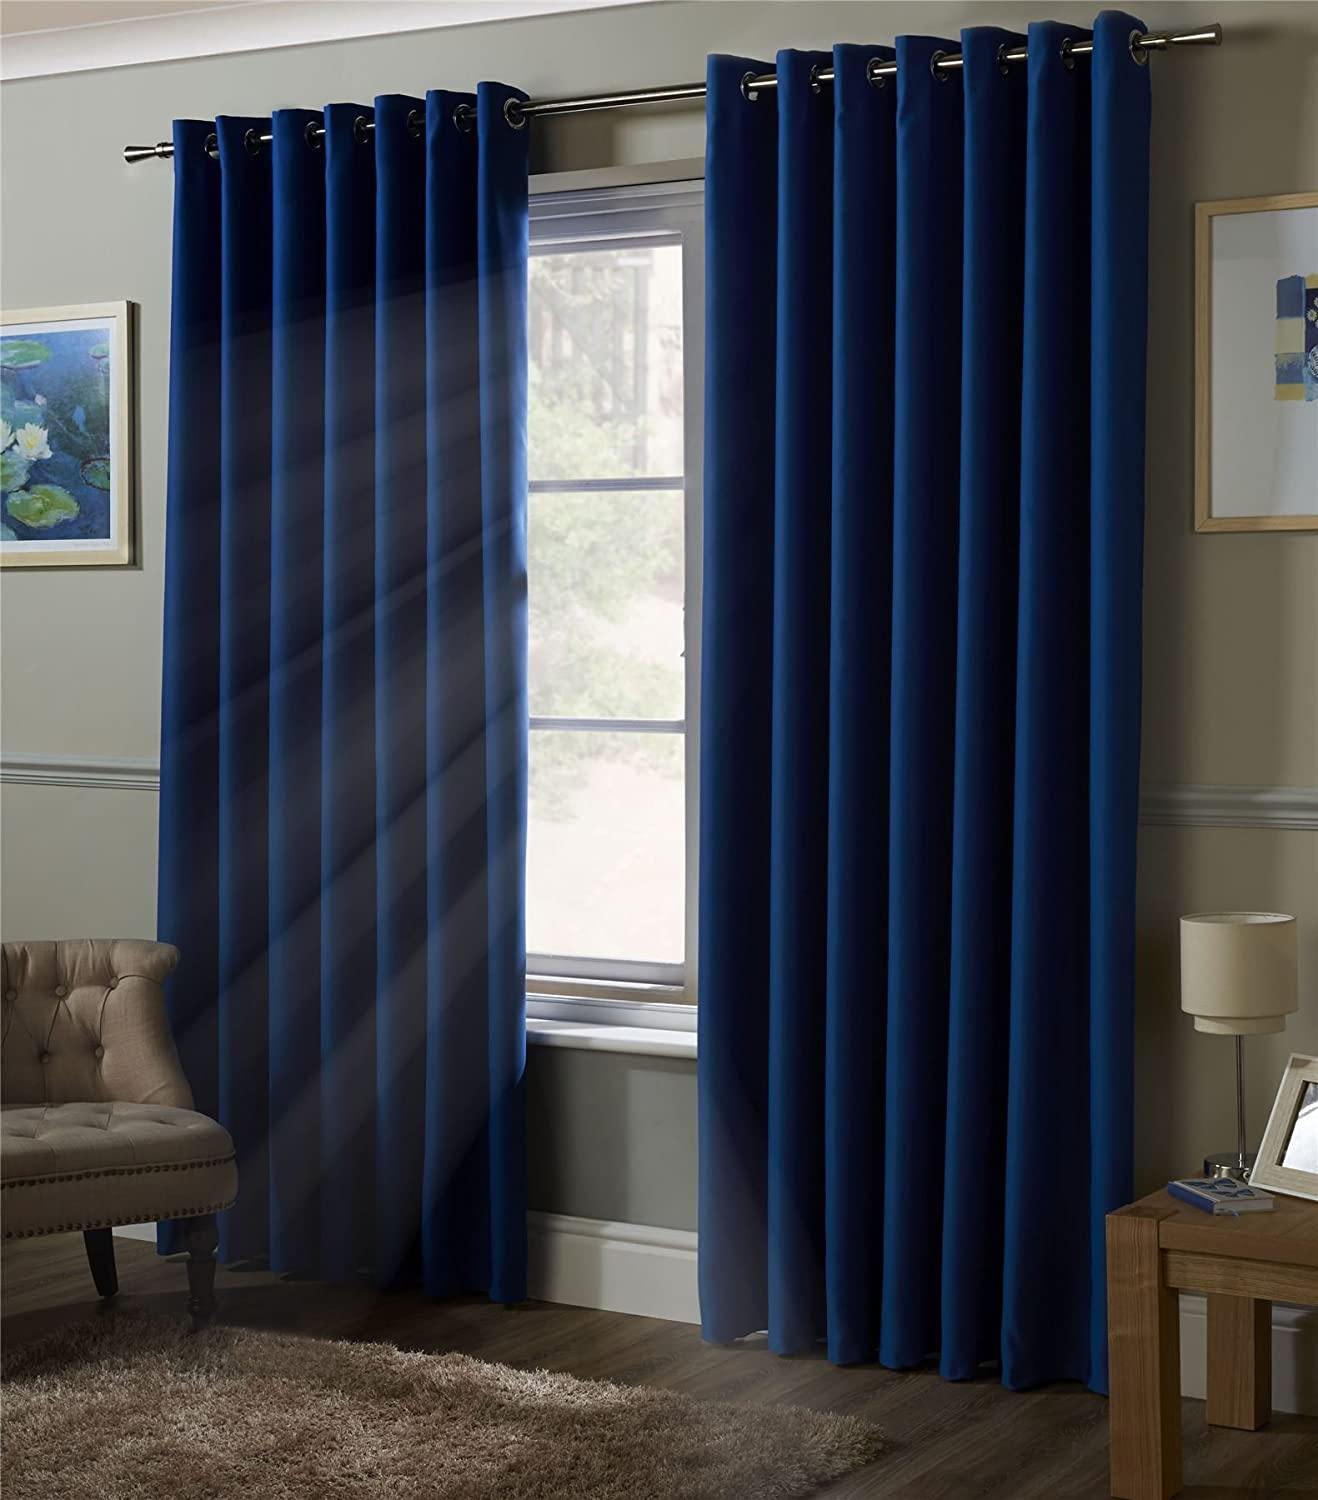 Pack of 2 Plain Dyed Eyelet Curtains With linning - Blue - DecorStudio - PLAIN DYED CURTAINS